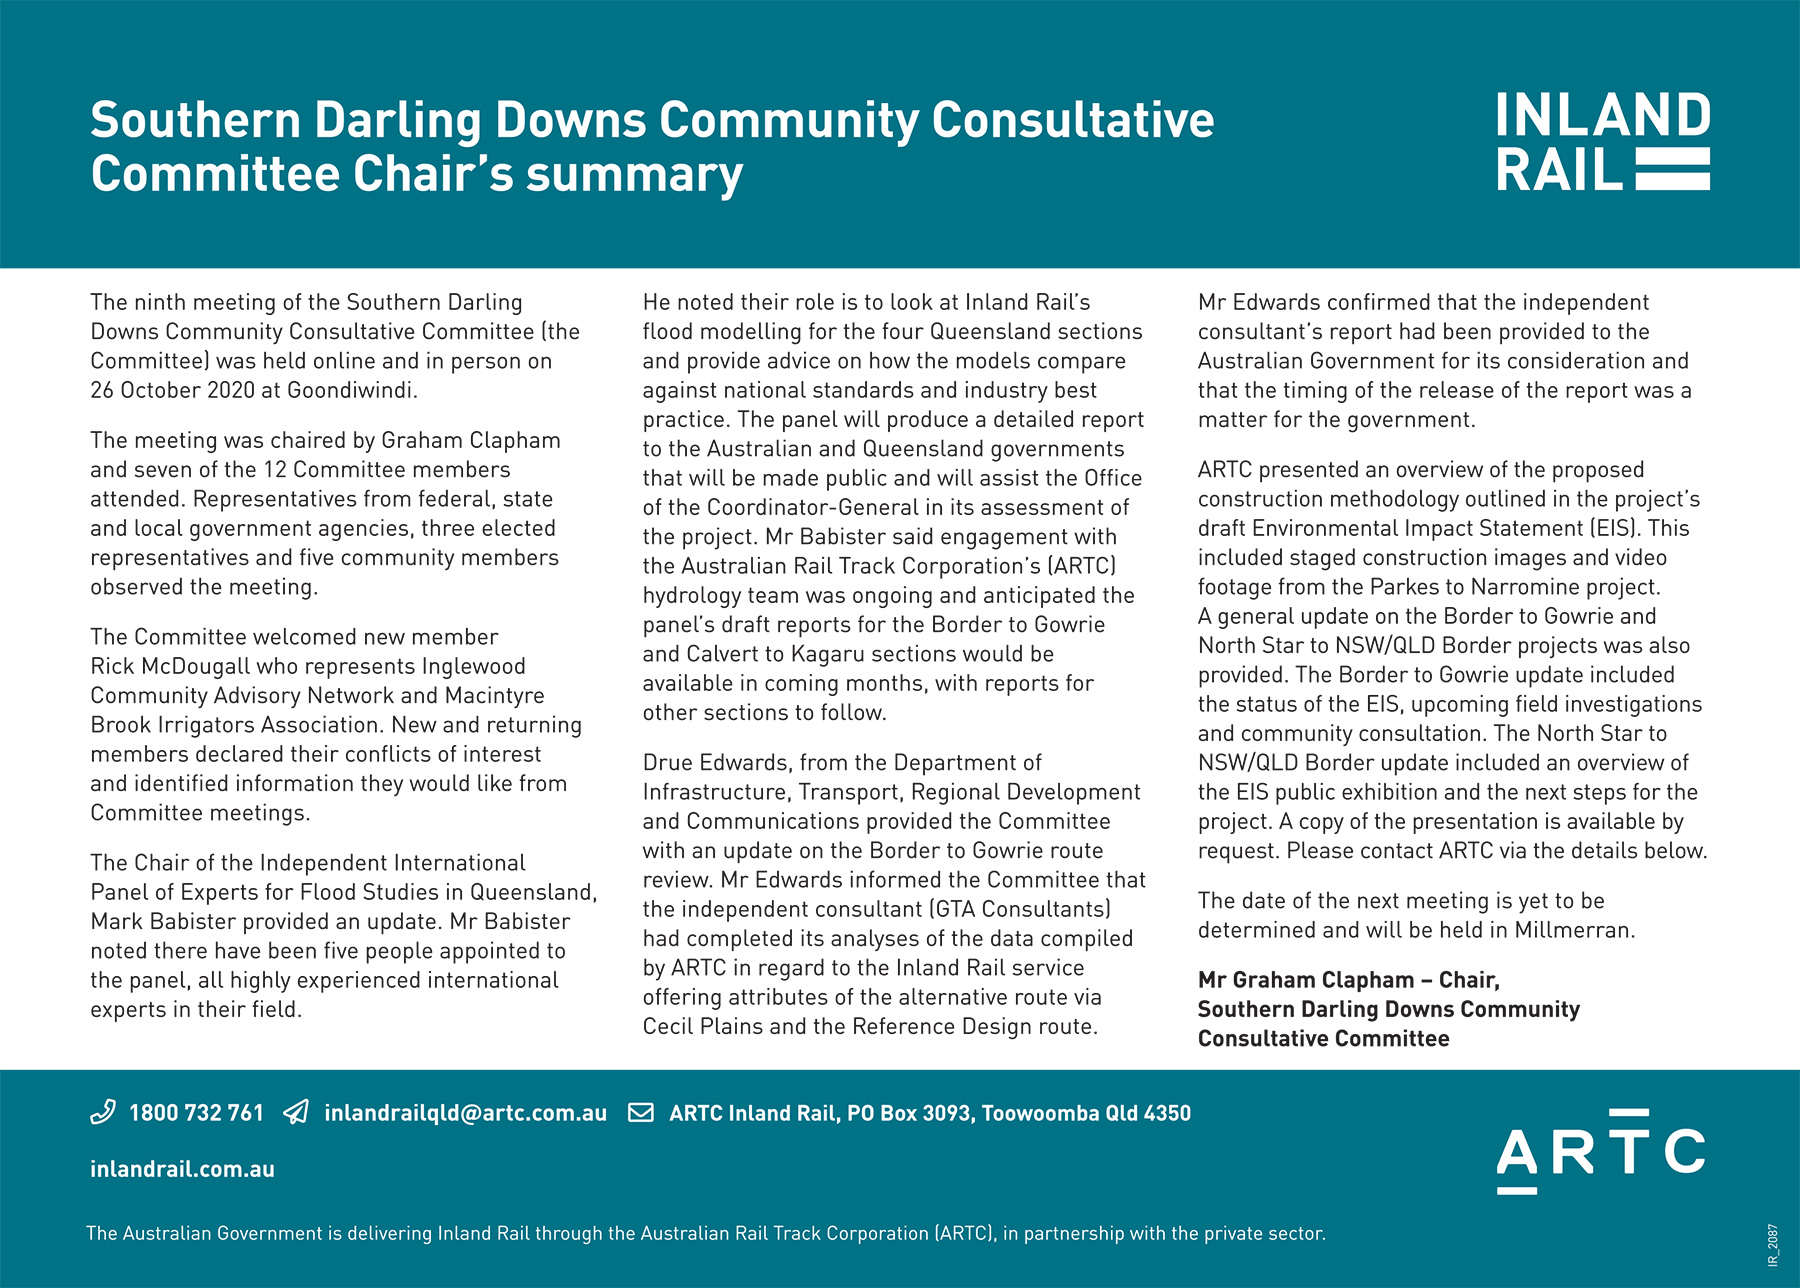 Southern Darling Downs Community Consultative Committee Chair's